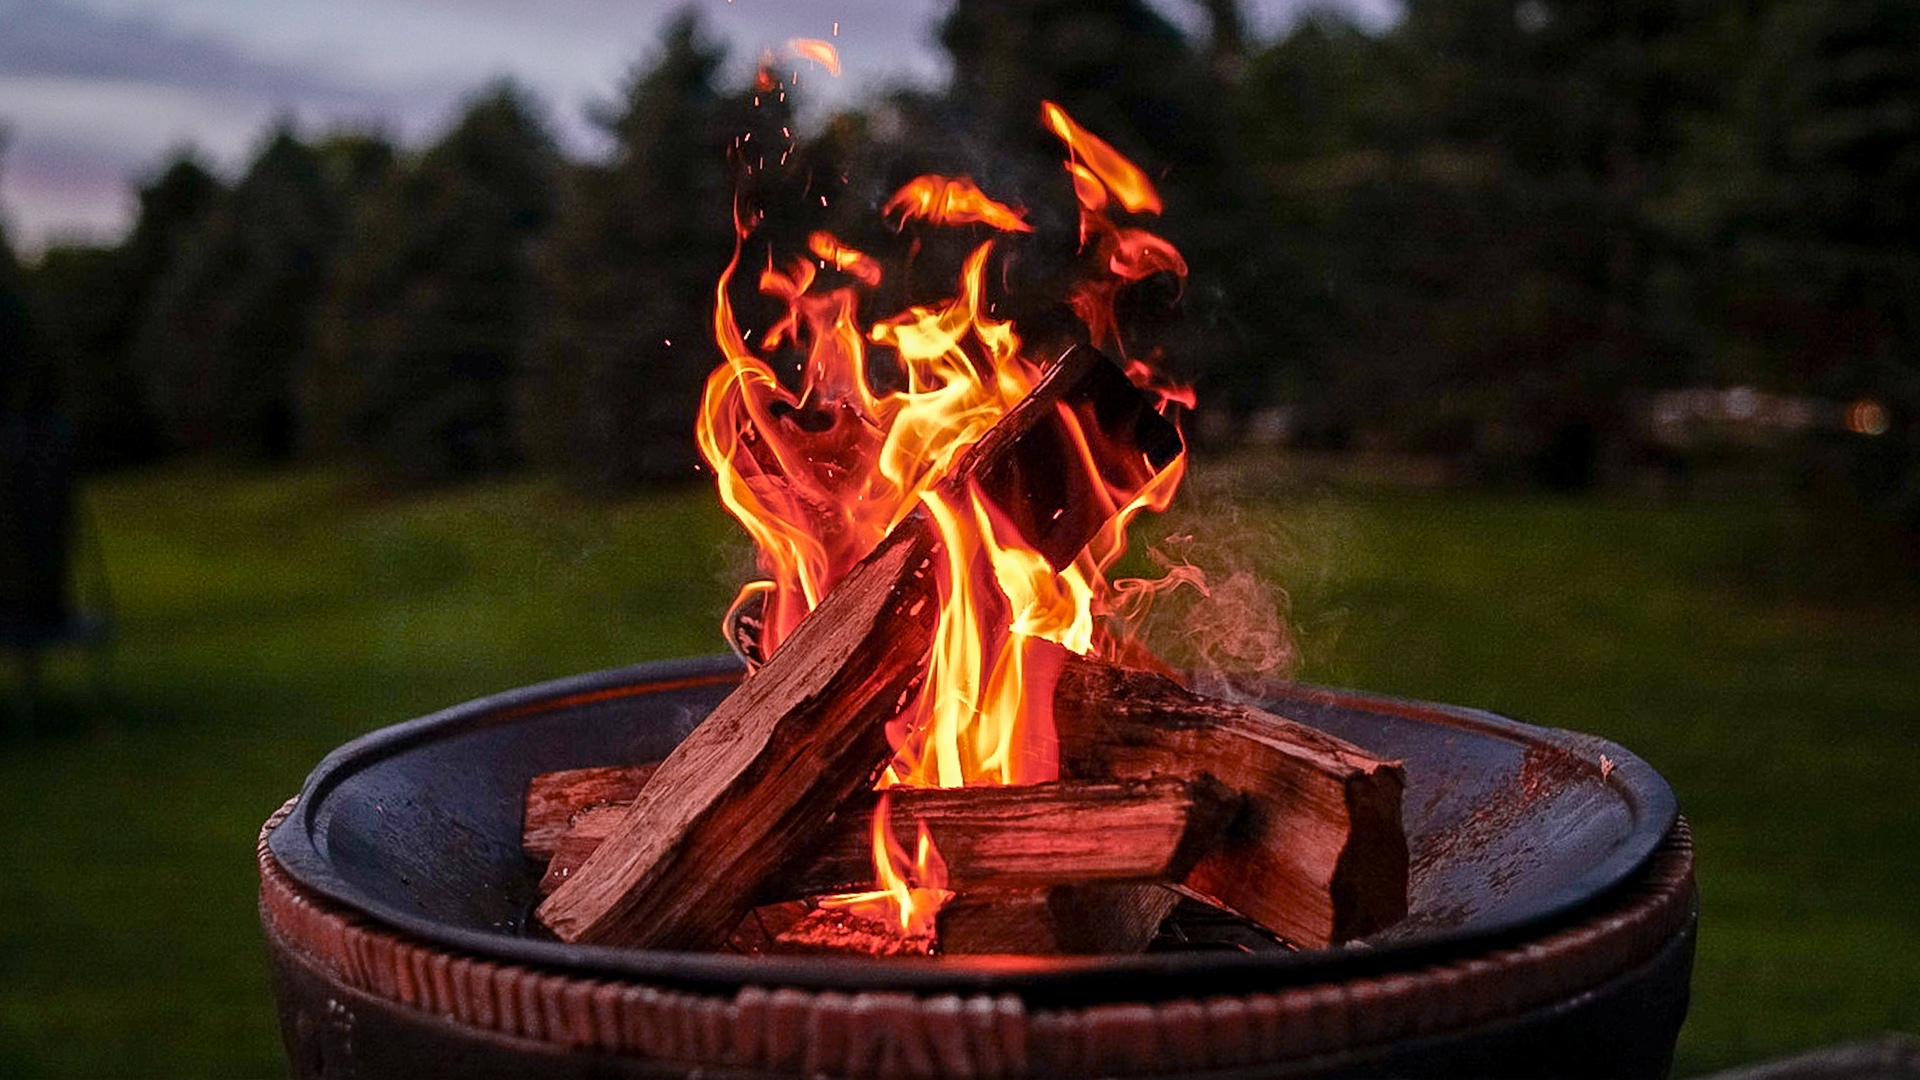 Landscaping Toronto - A fire pit with burning logs and rising flames in an outdoor patio setting at dusk, surrounded by trees.